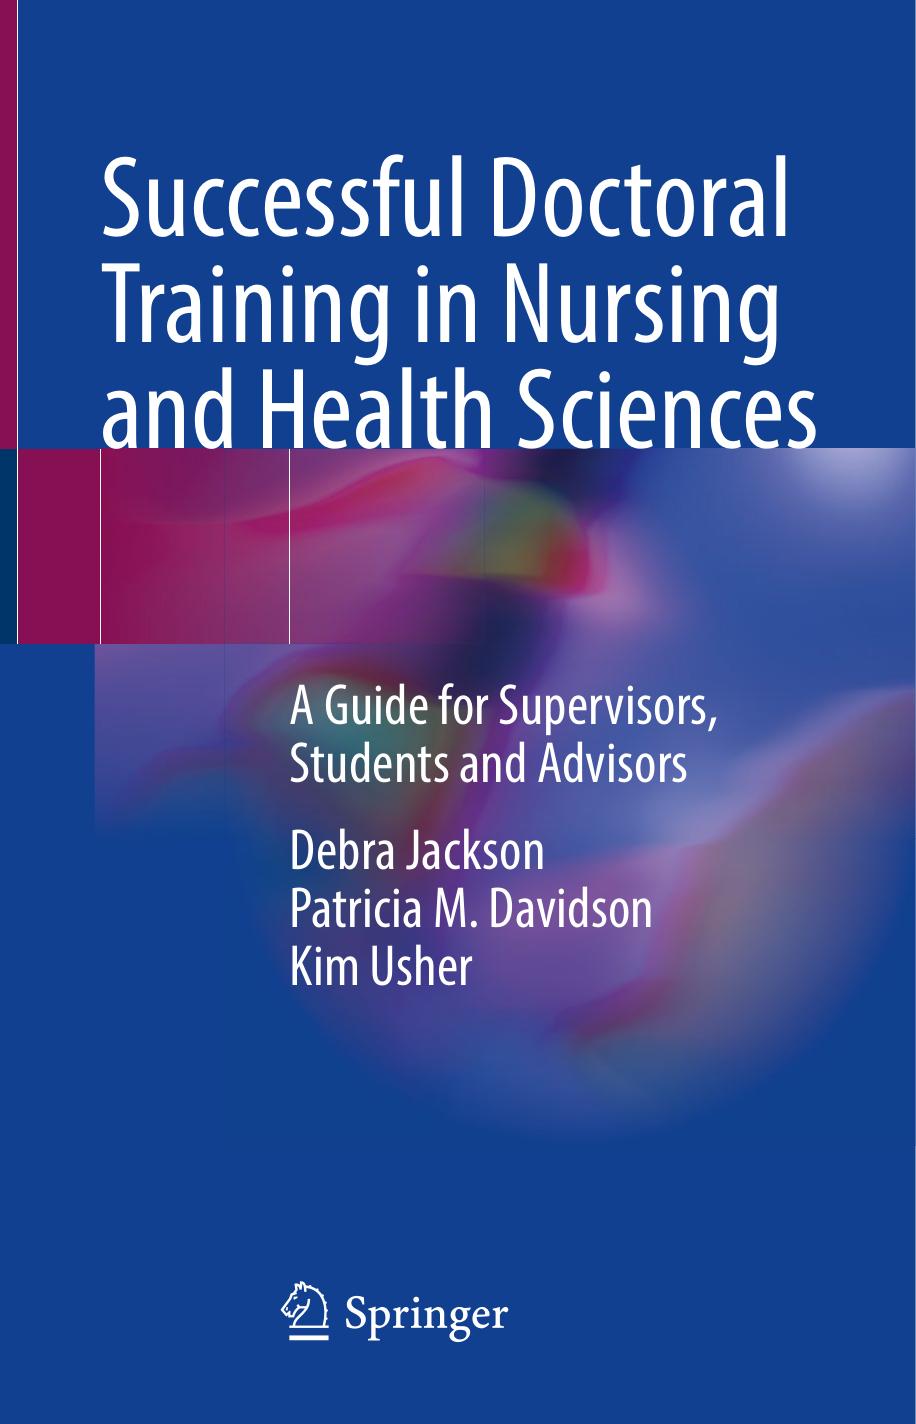 Successful Doctoral Training in Nursing and Health Sciences  A Guide for Supervisors, Students and Advisors (2021)